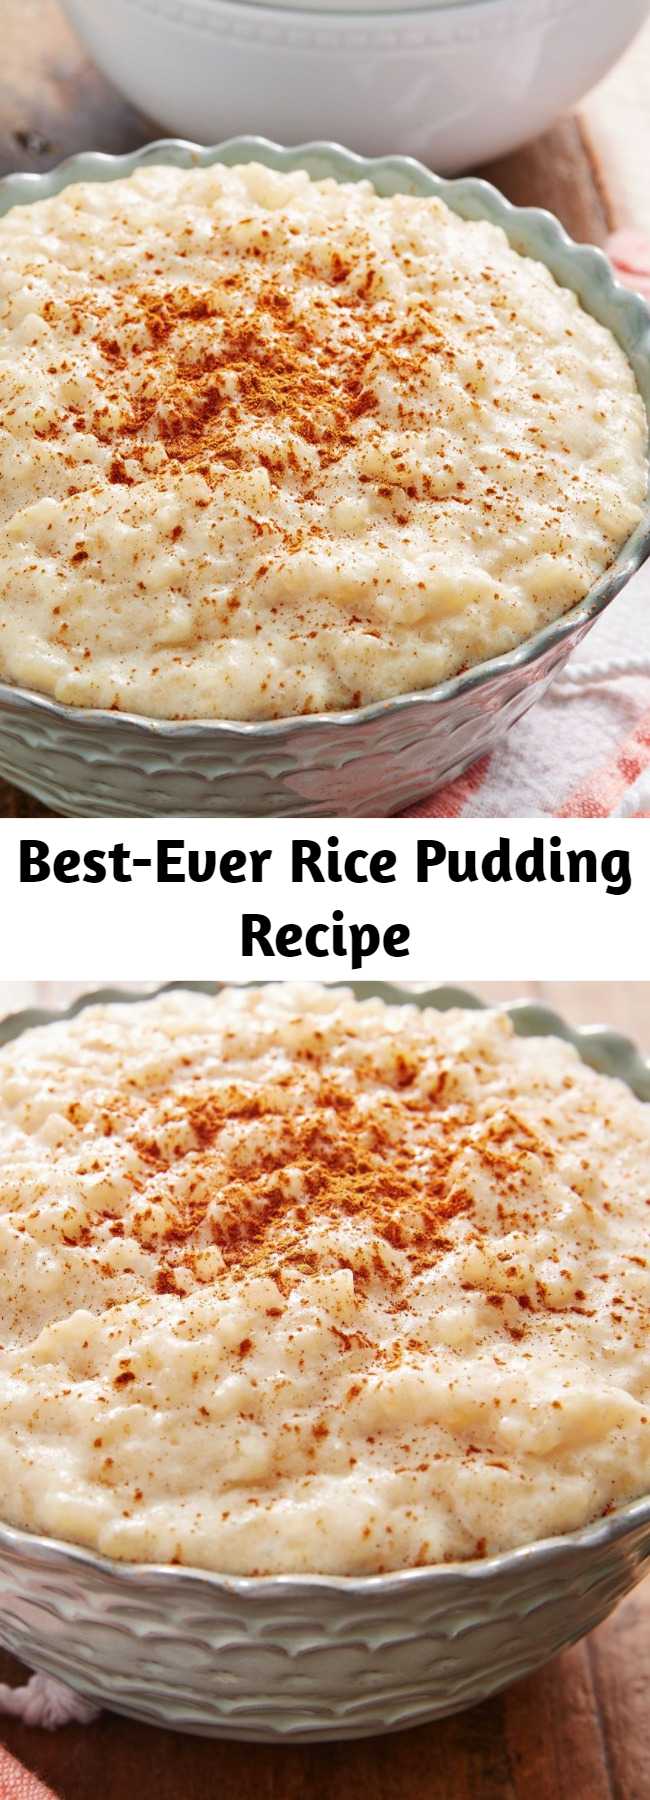 Best-Ever Rice Pudding Recipe - This cozy Rice Pudding is perfect for dessert or a sweet breakfast.